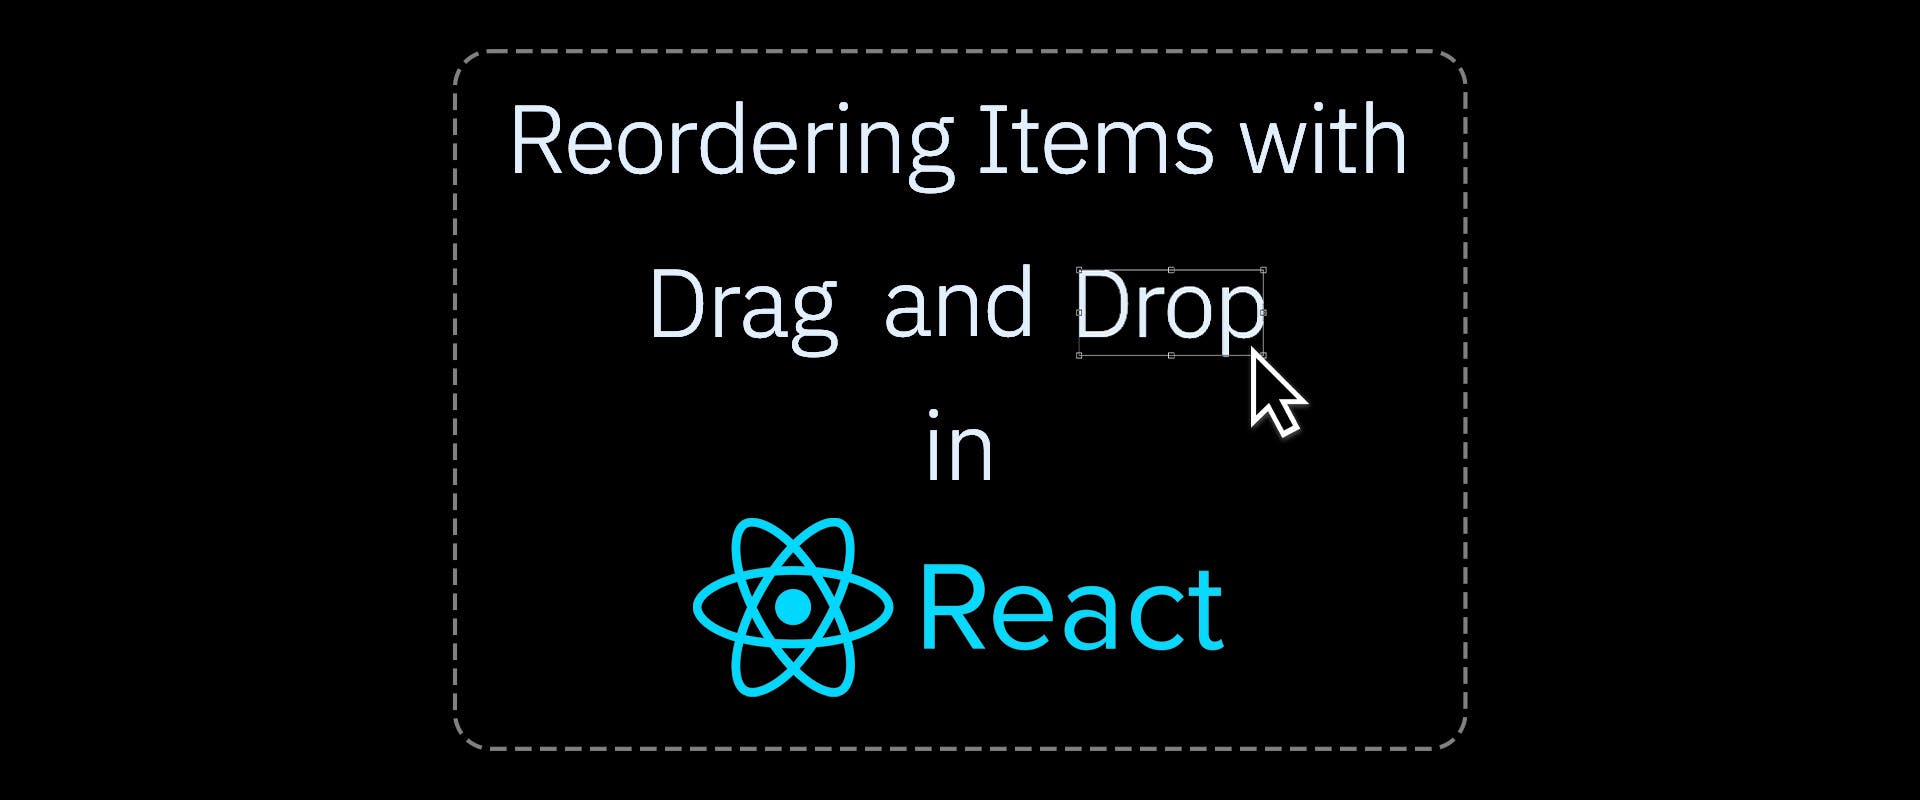 Reordering Items with Drag and Drop in React